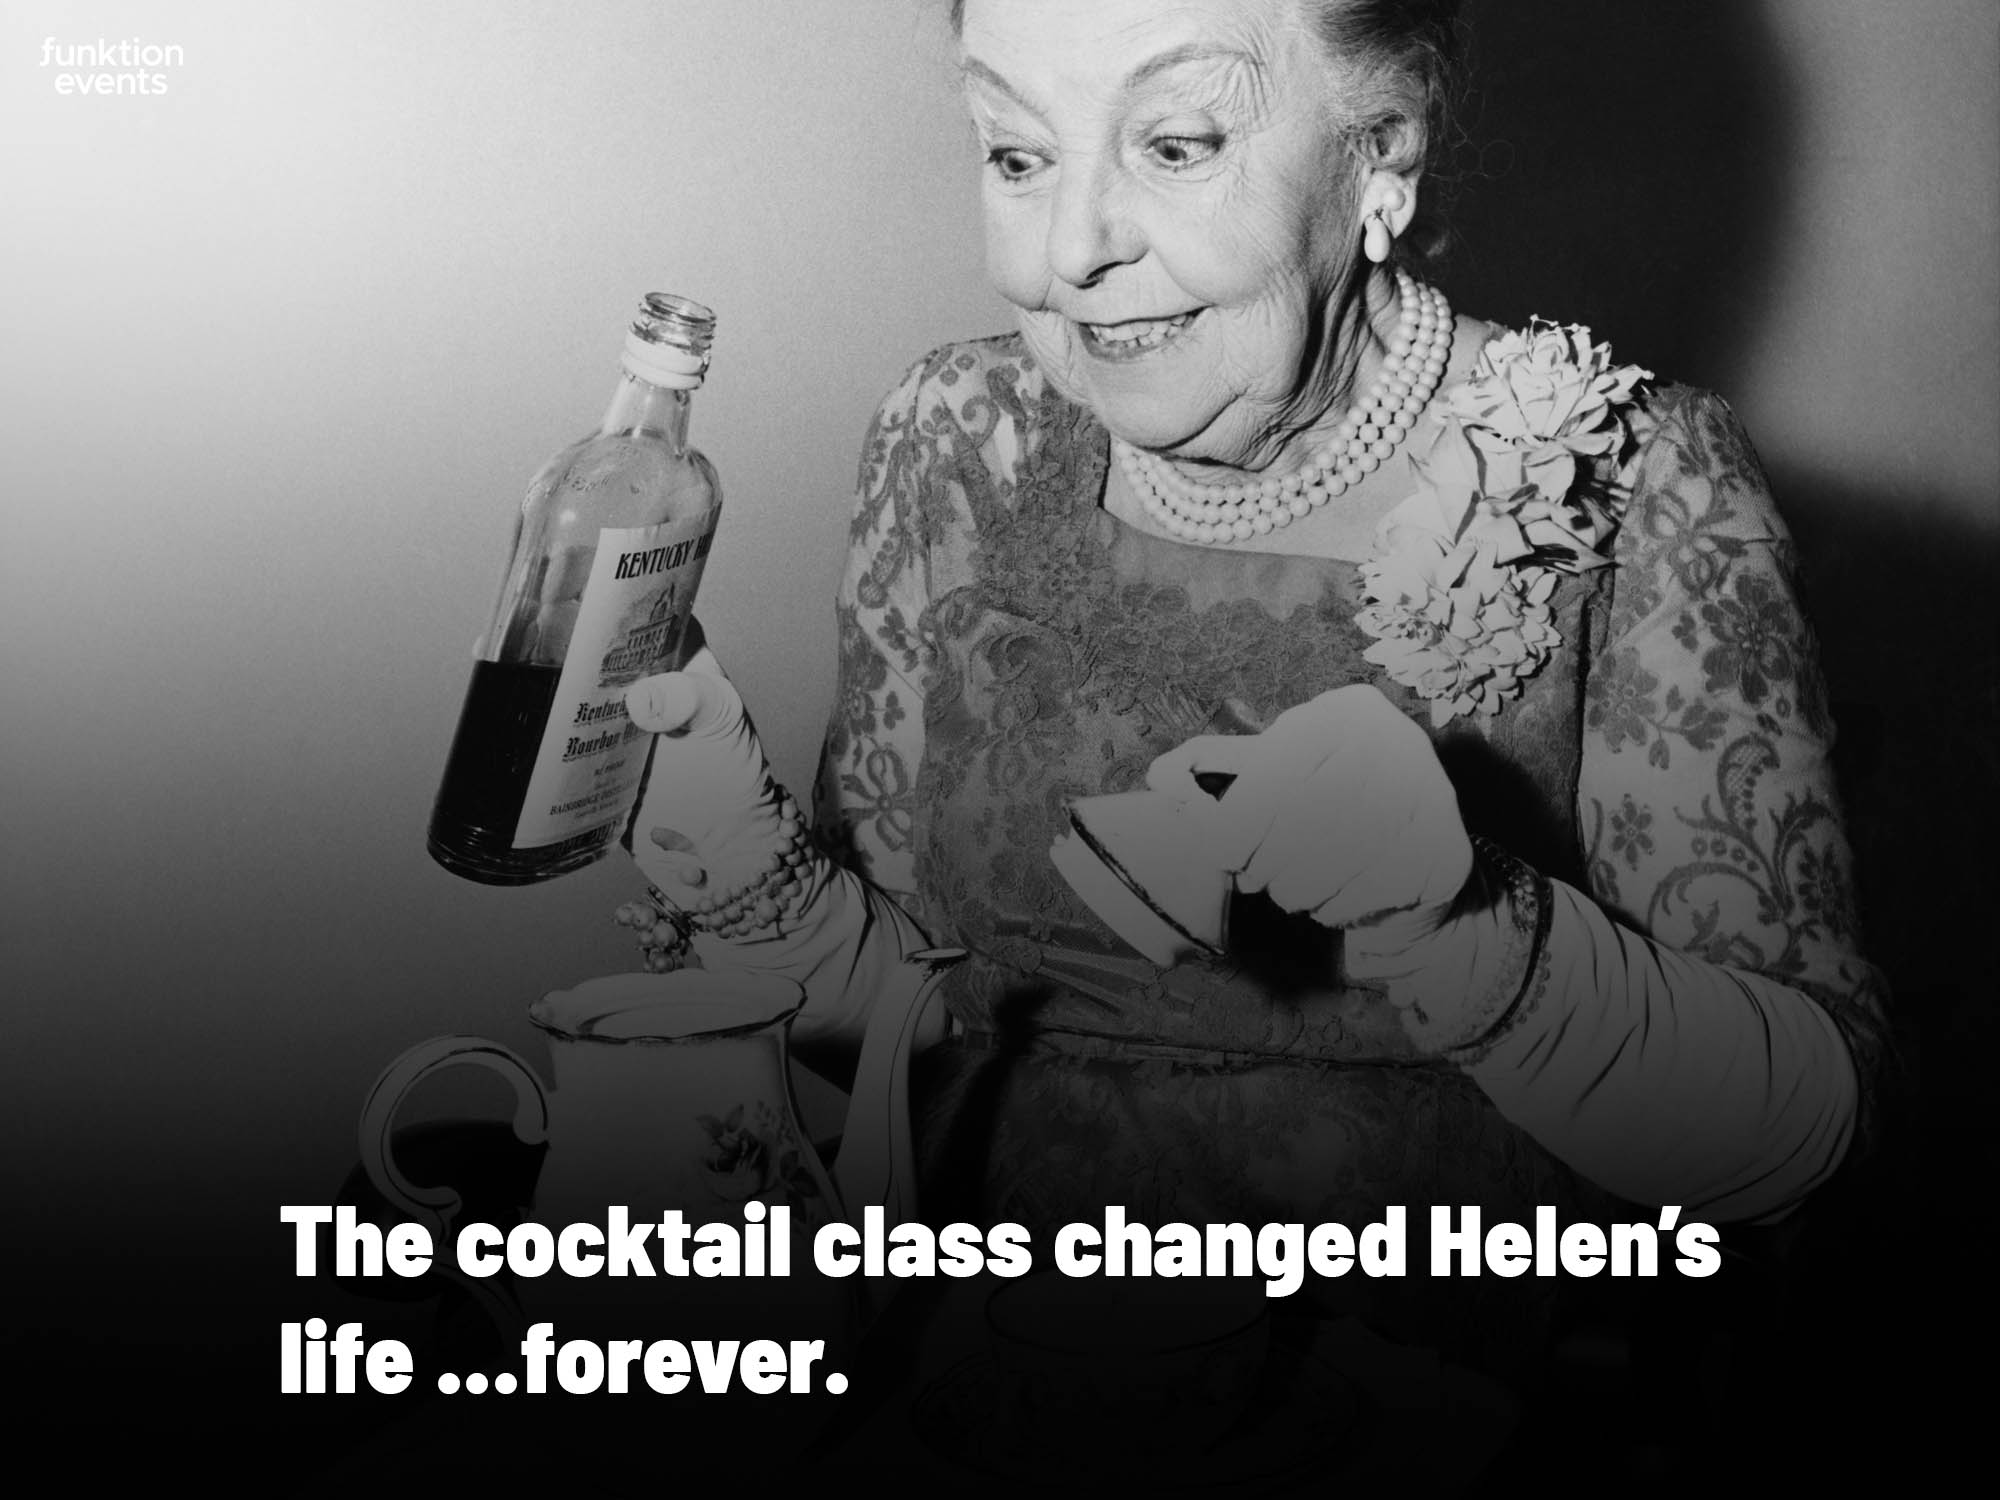 The cocktail making class changed Helen's life forever - Meme 6